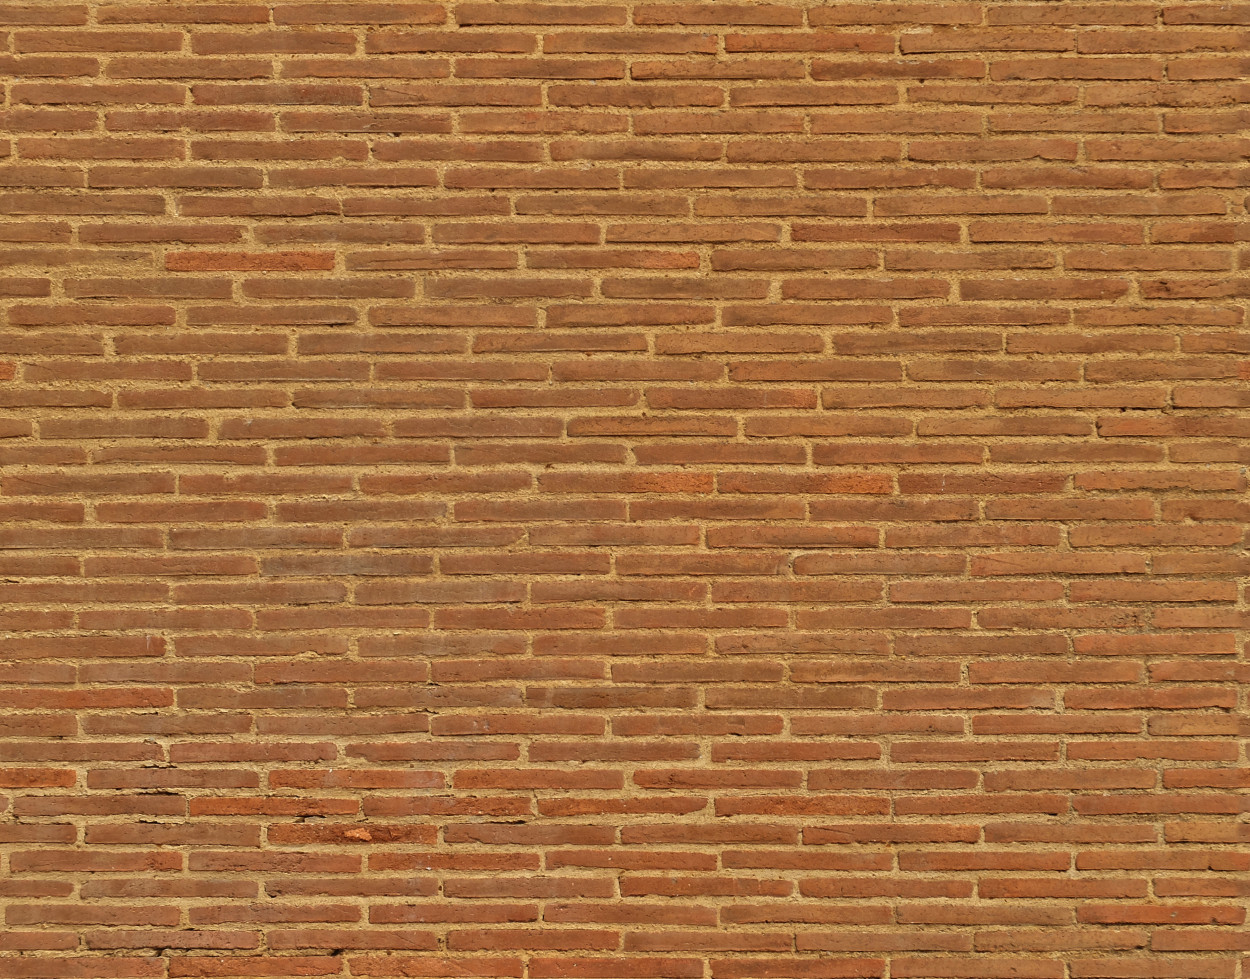 A seamless red brick texture for use in architectural drawings and 3D models